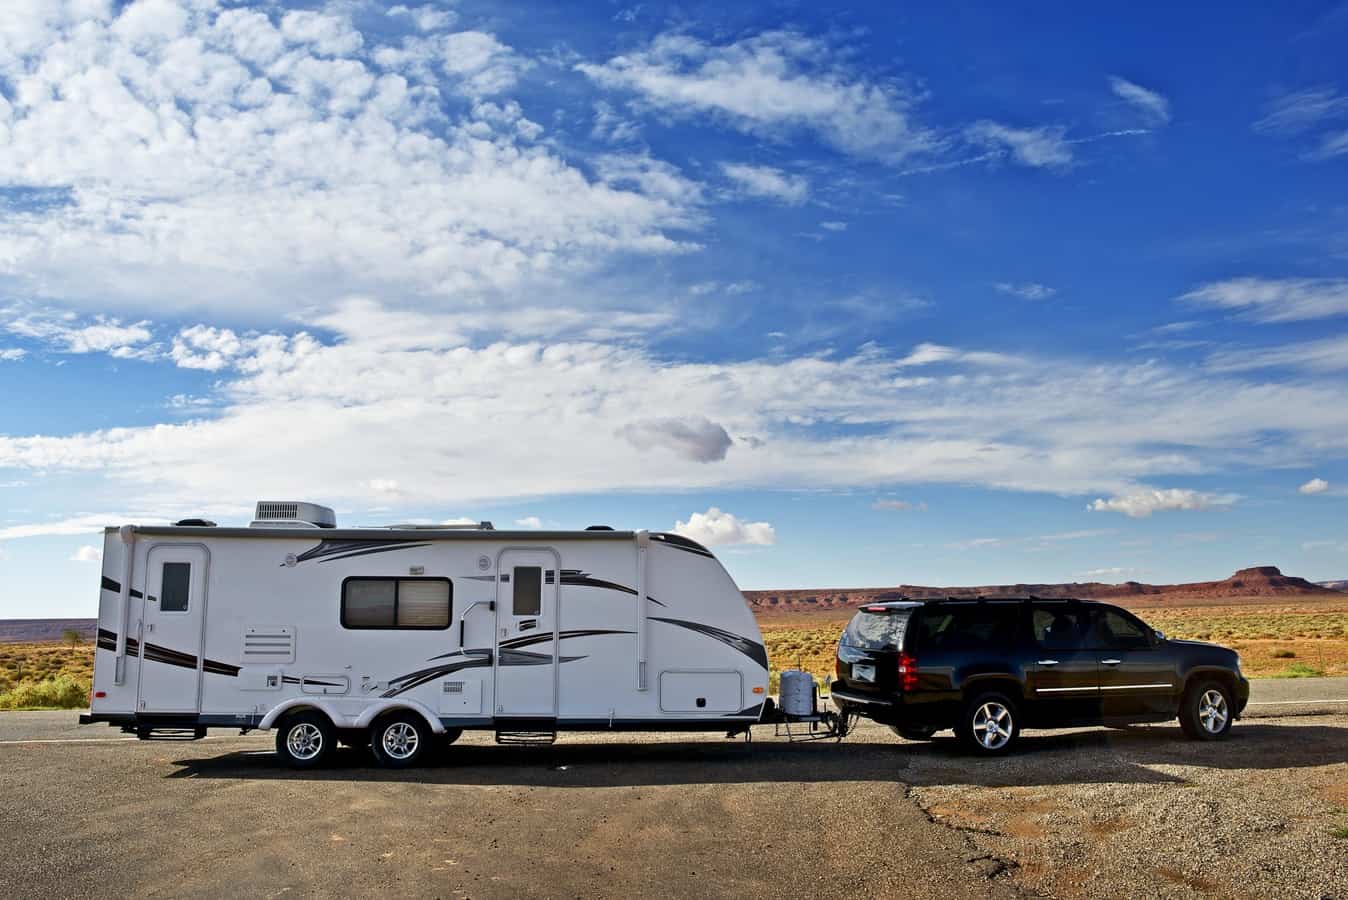 Lance Travel Trailer Review: Are They High Quality?